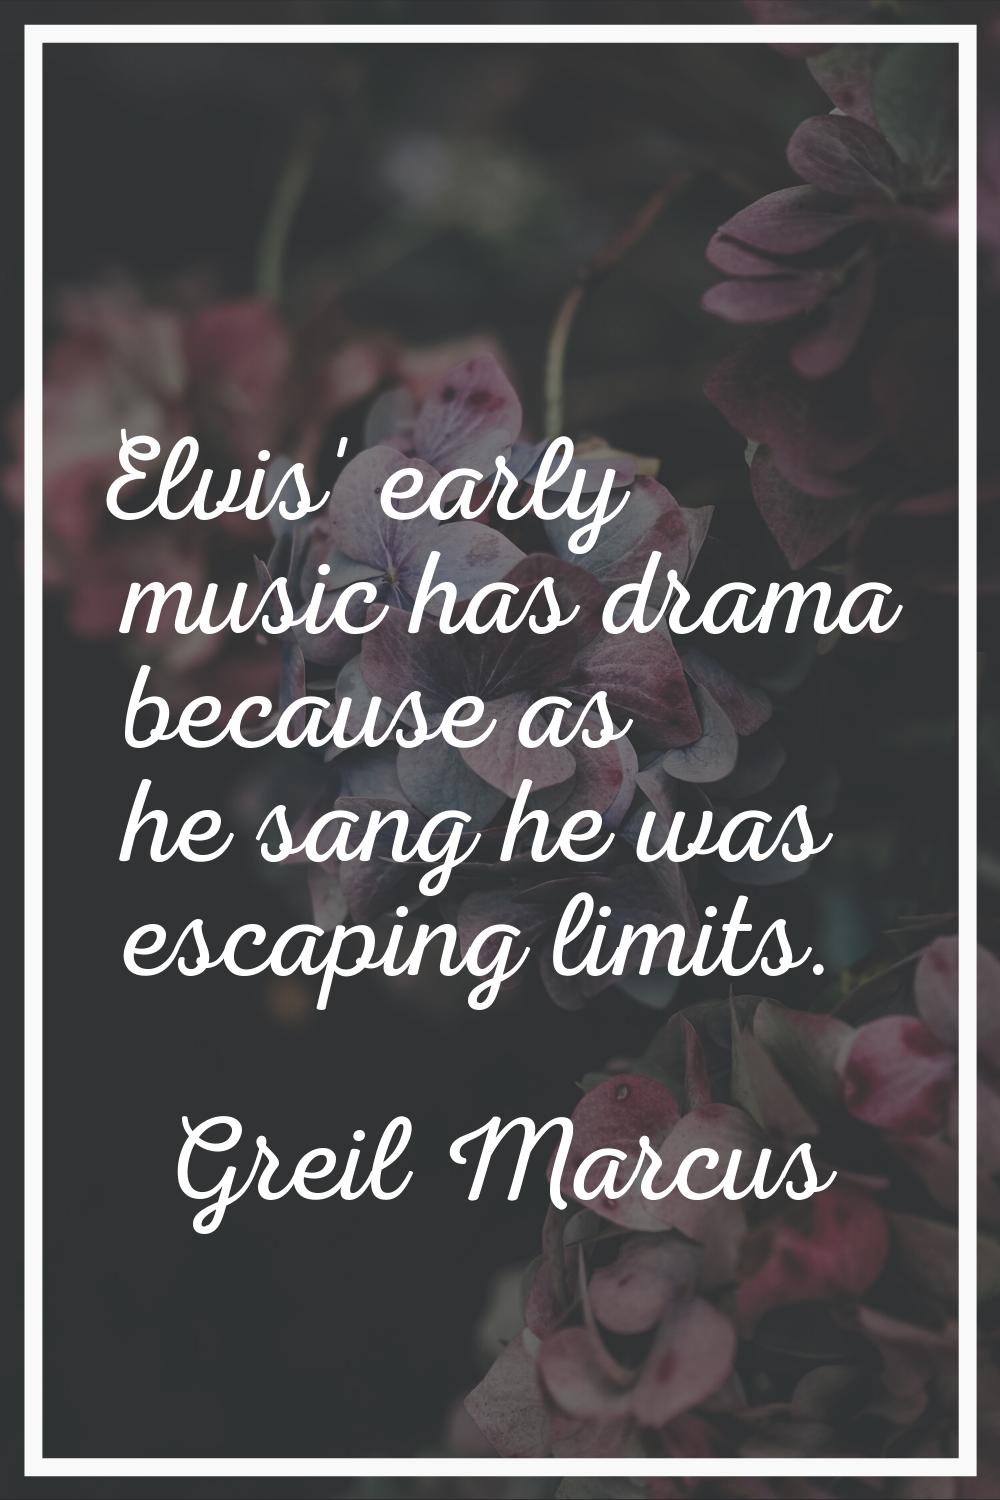 Elvis' early music has drama because as he sang he was escaping limits.